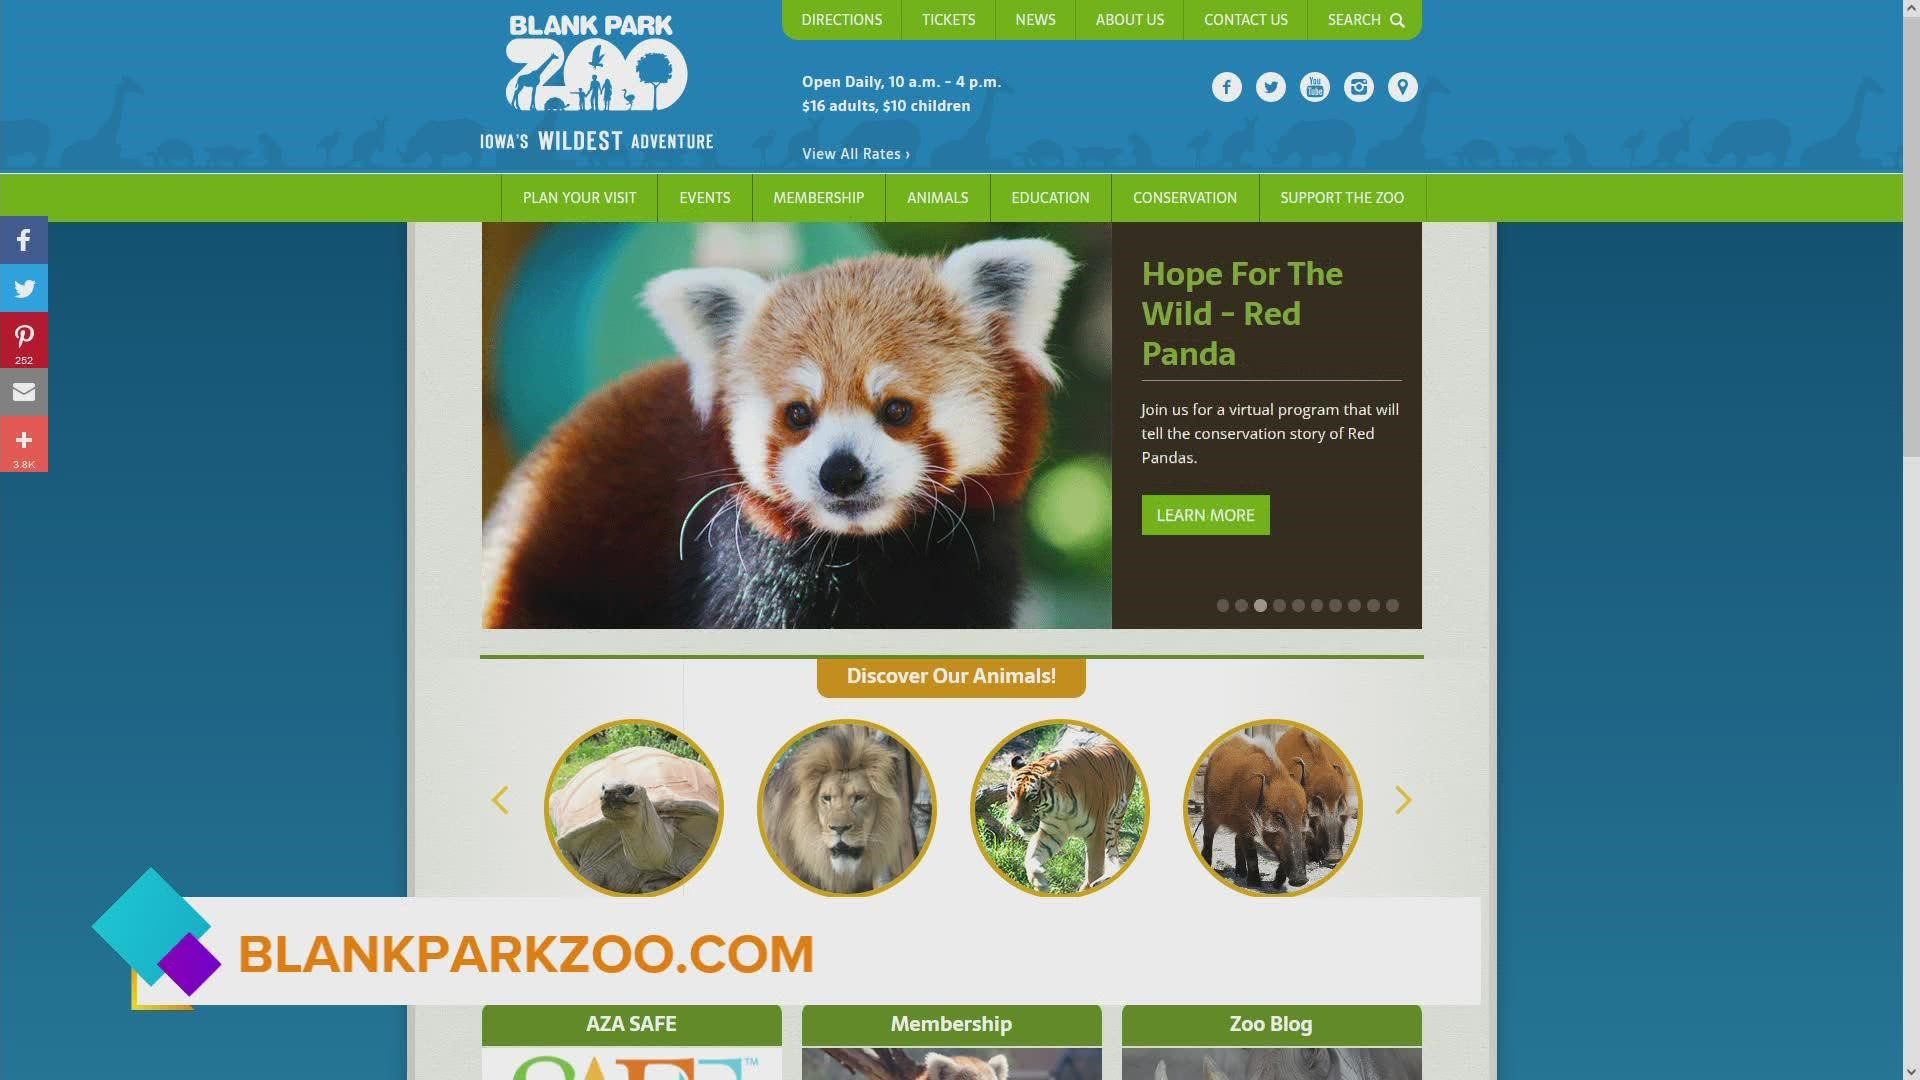 Chris Eckles, Blank Park Zoo, talks about FREE REGISTRATION for Hope for the Wild-Red Pandas virtual program and final days to vote for name of baby giraffe!